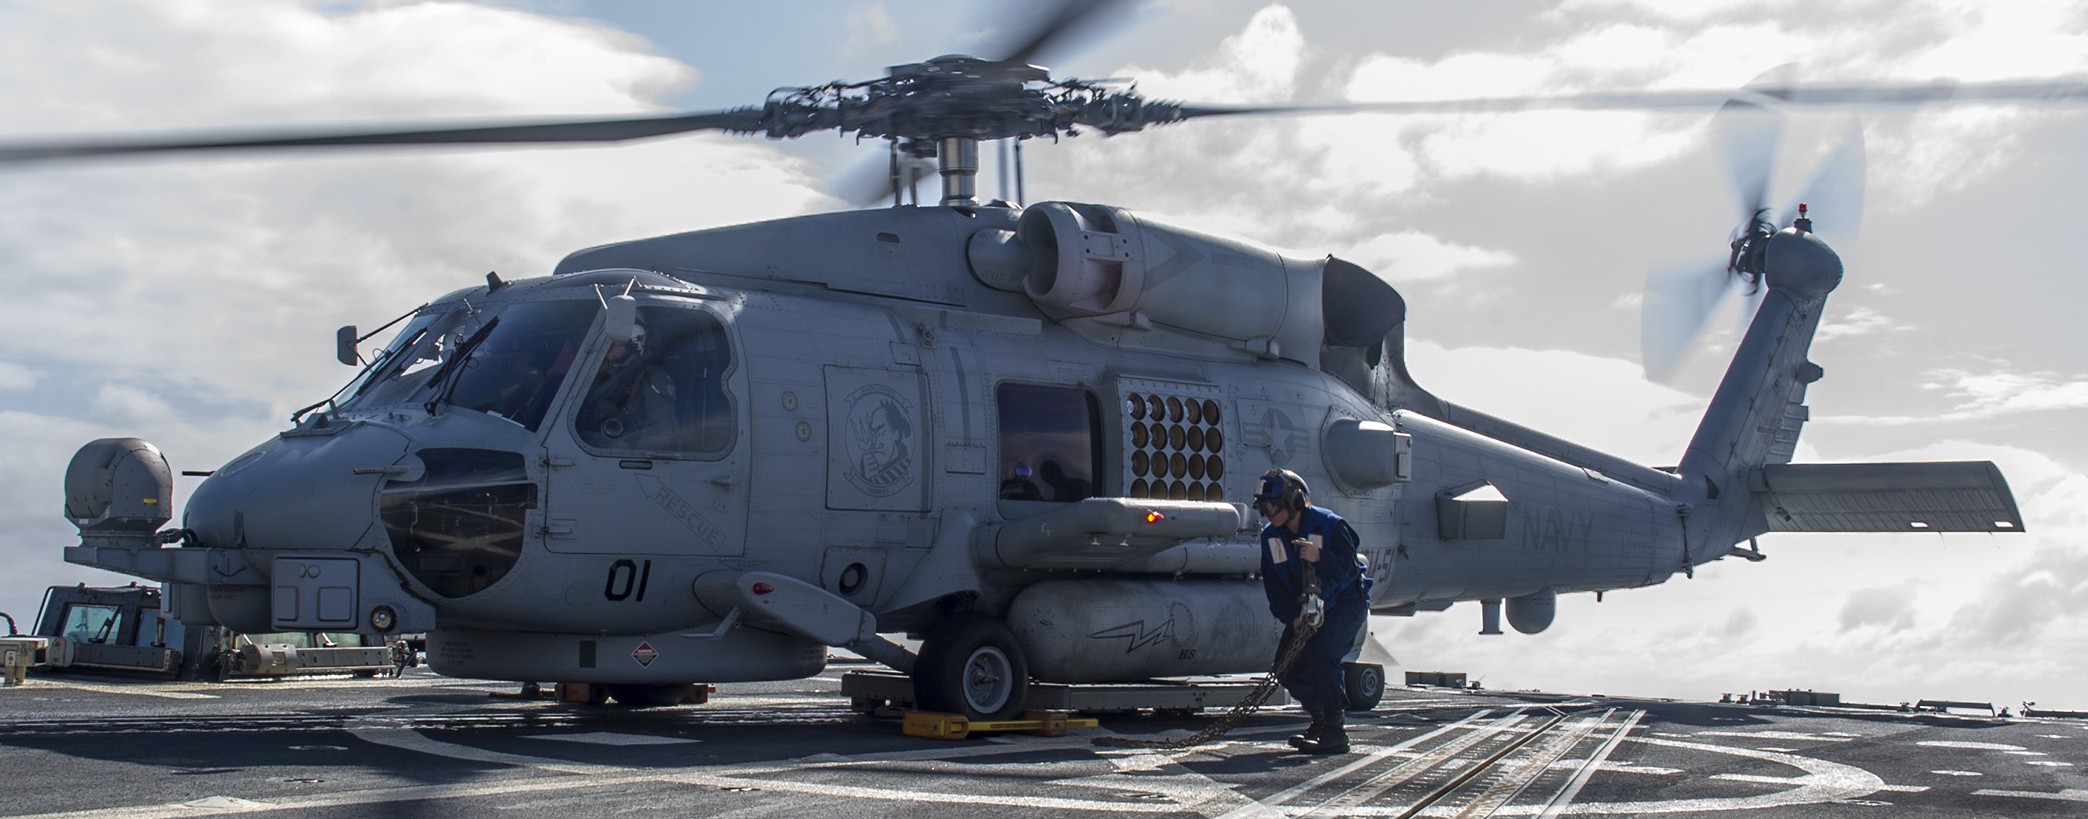 hsm-51 warlords helicopter maritime strike squadron mh-60r seahawk navy 2014 74